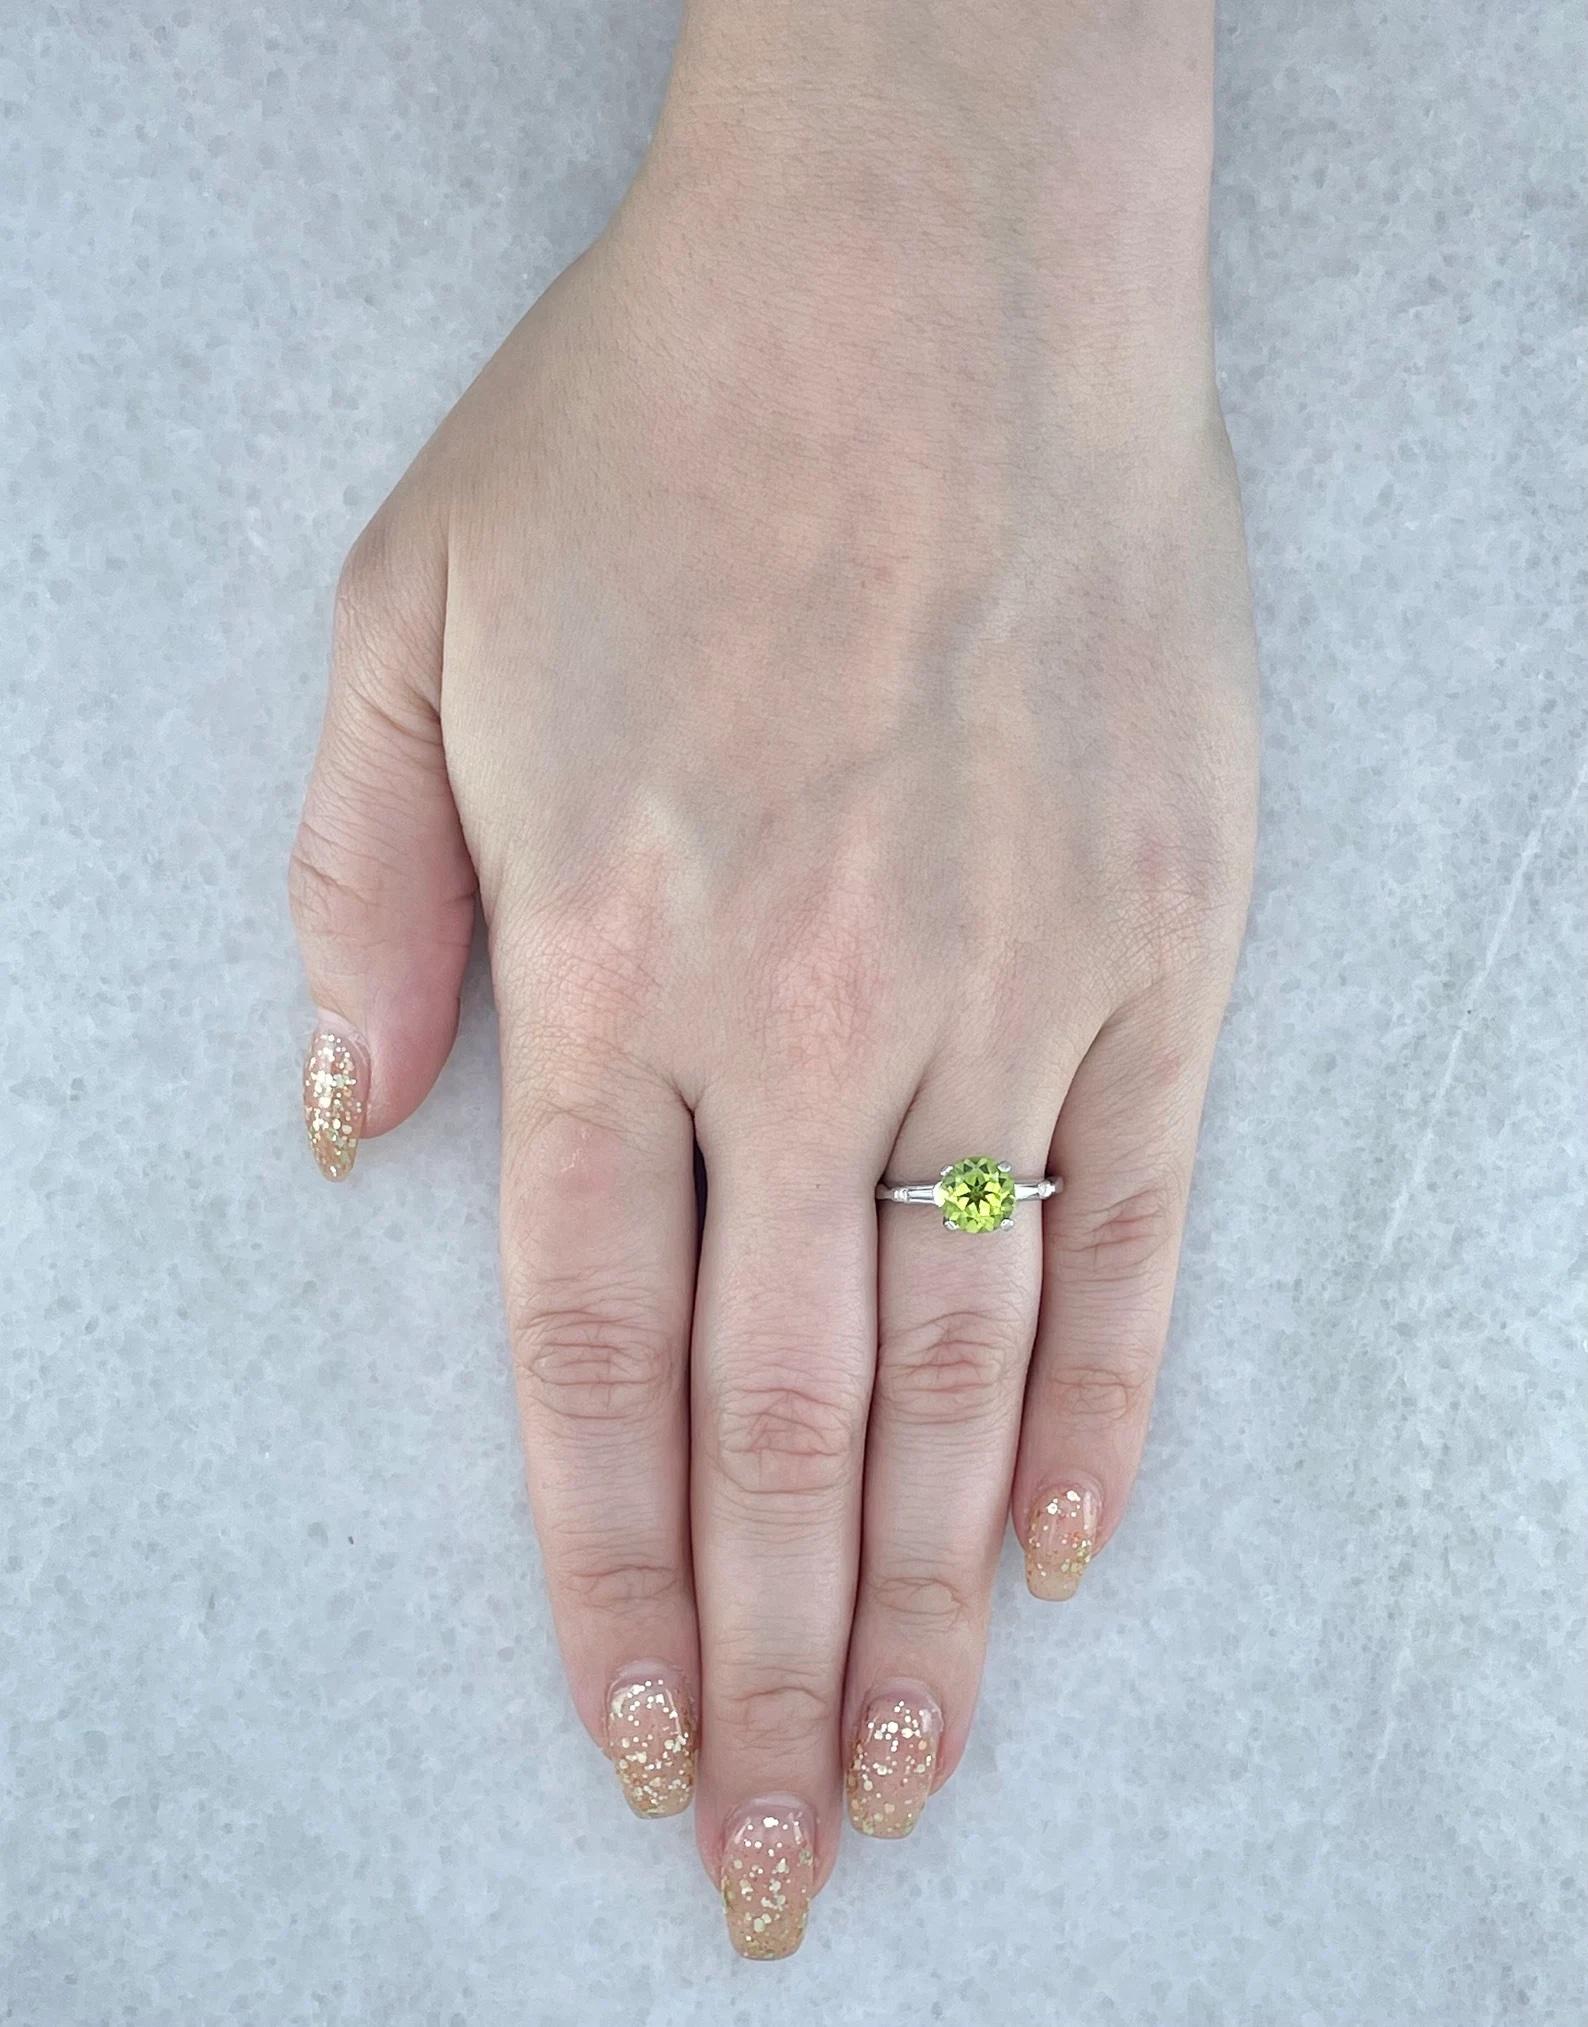 A beautiful vintage peridot and baguette cut diamond three stone ring in platinum. Centered by a 2 carat old European cut peridot of beautiful vivid green color this ring also features two accenting tapered baguette cut diamonds. Grading as G color